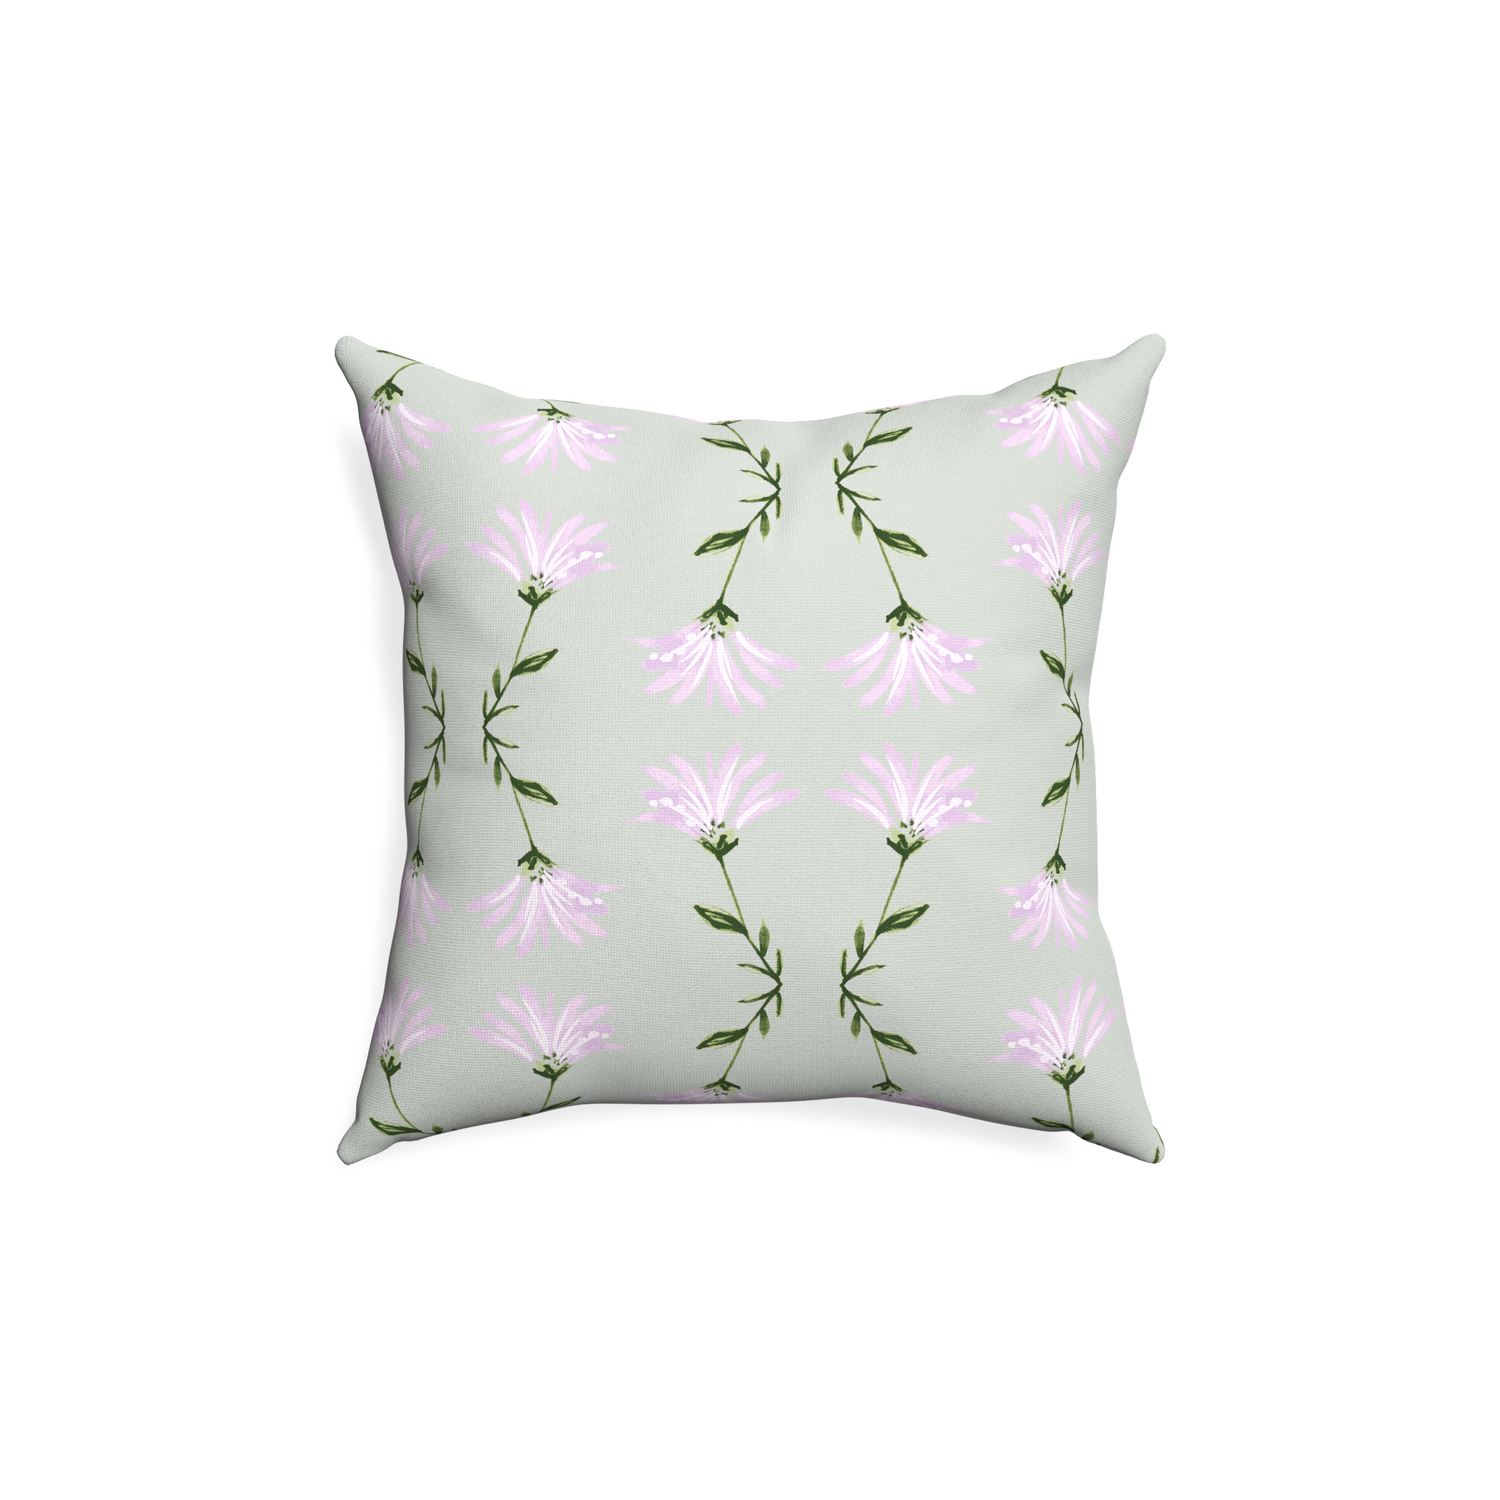 18-square marina sage custom pillow with none on white background